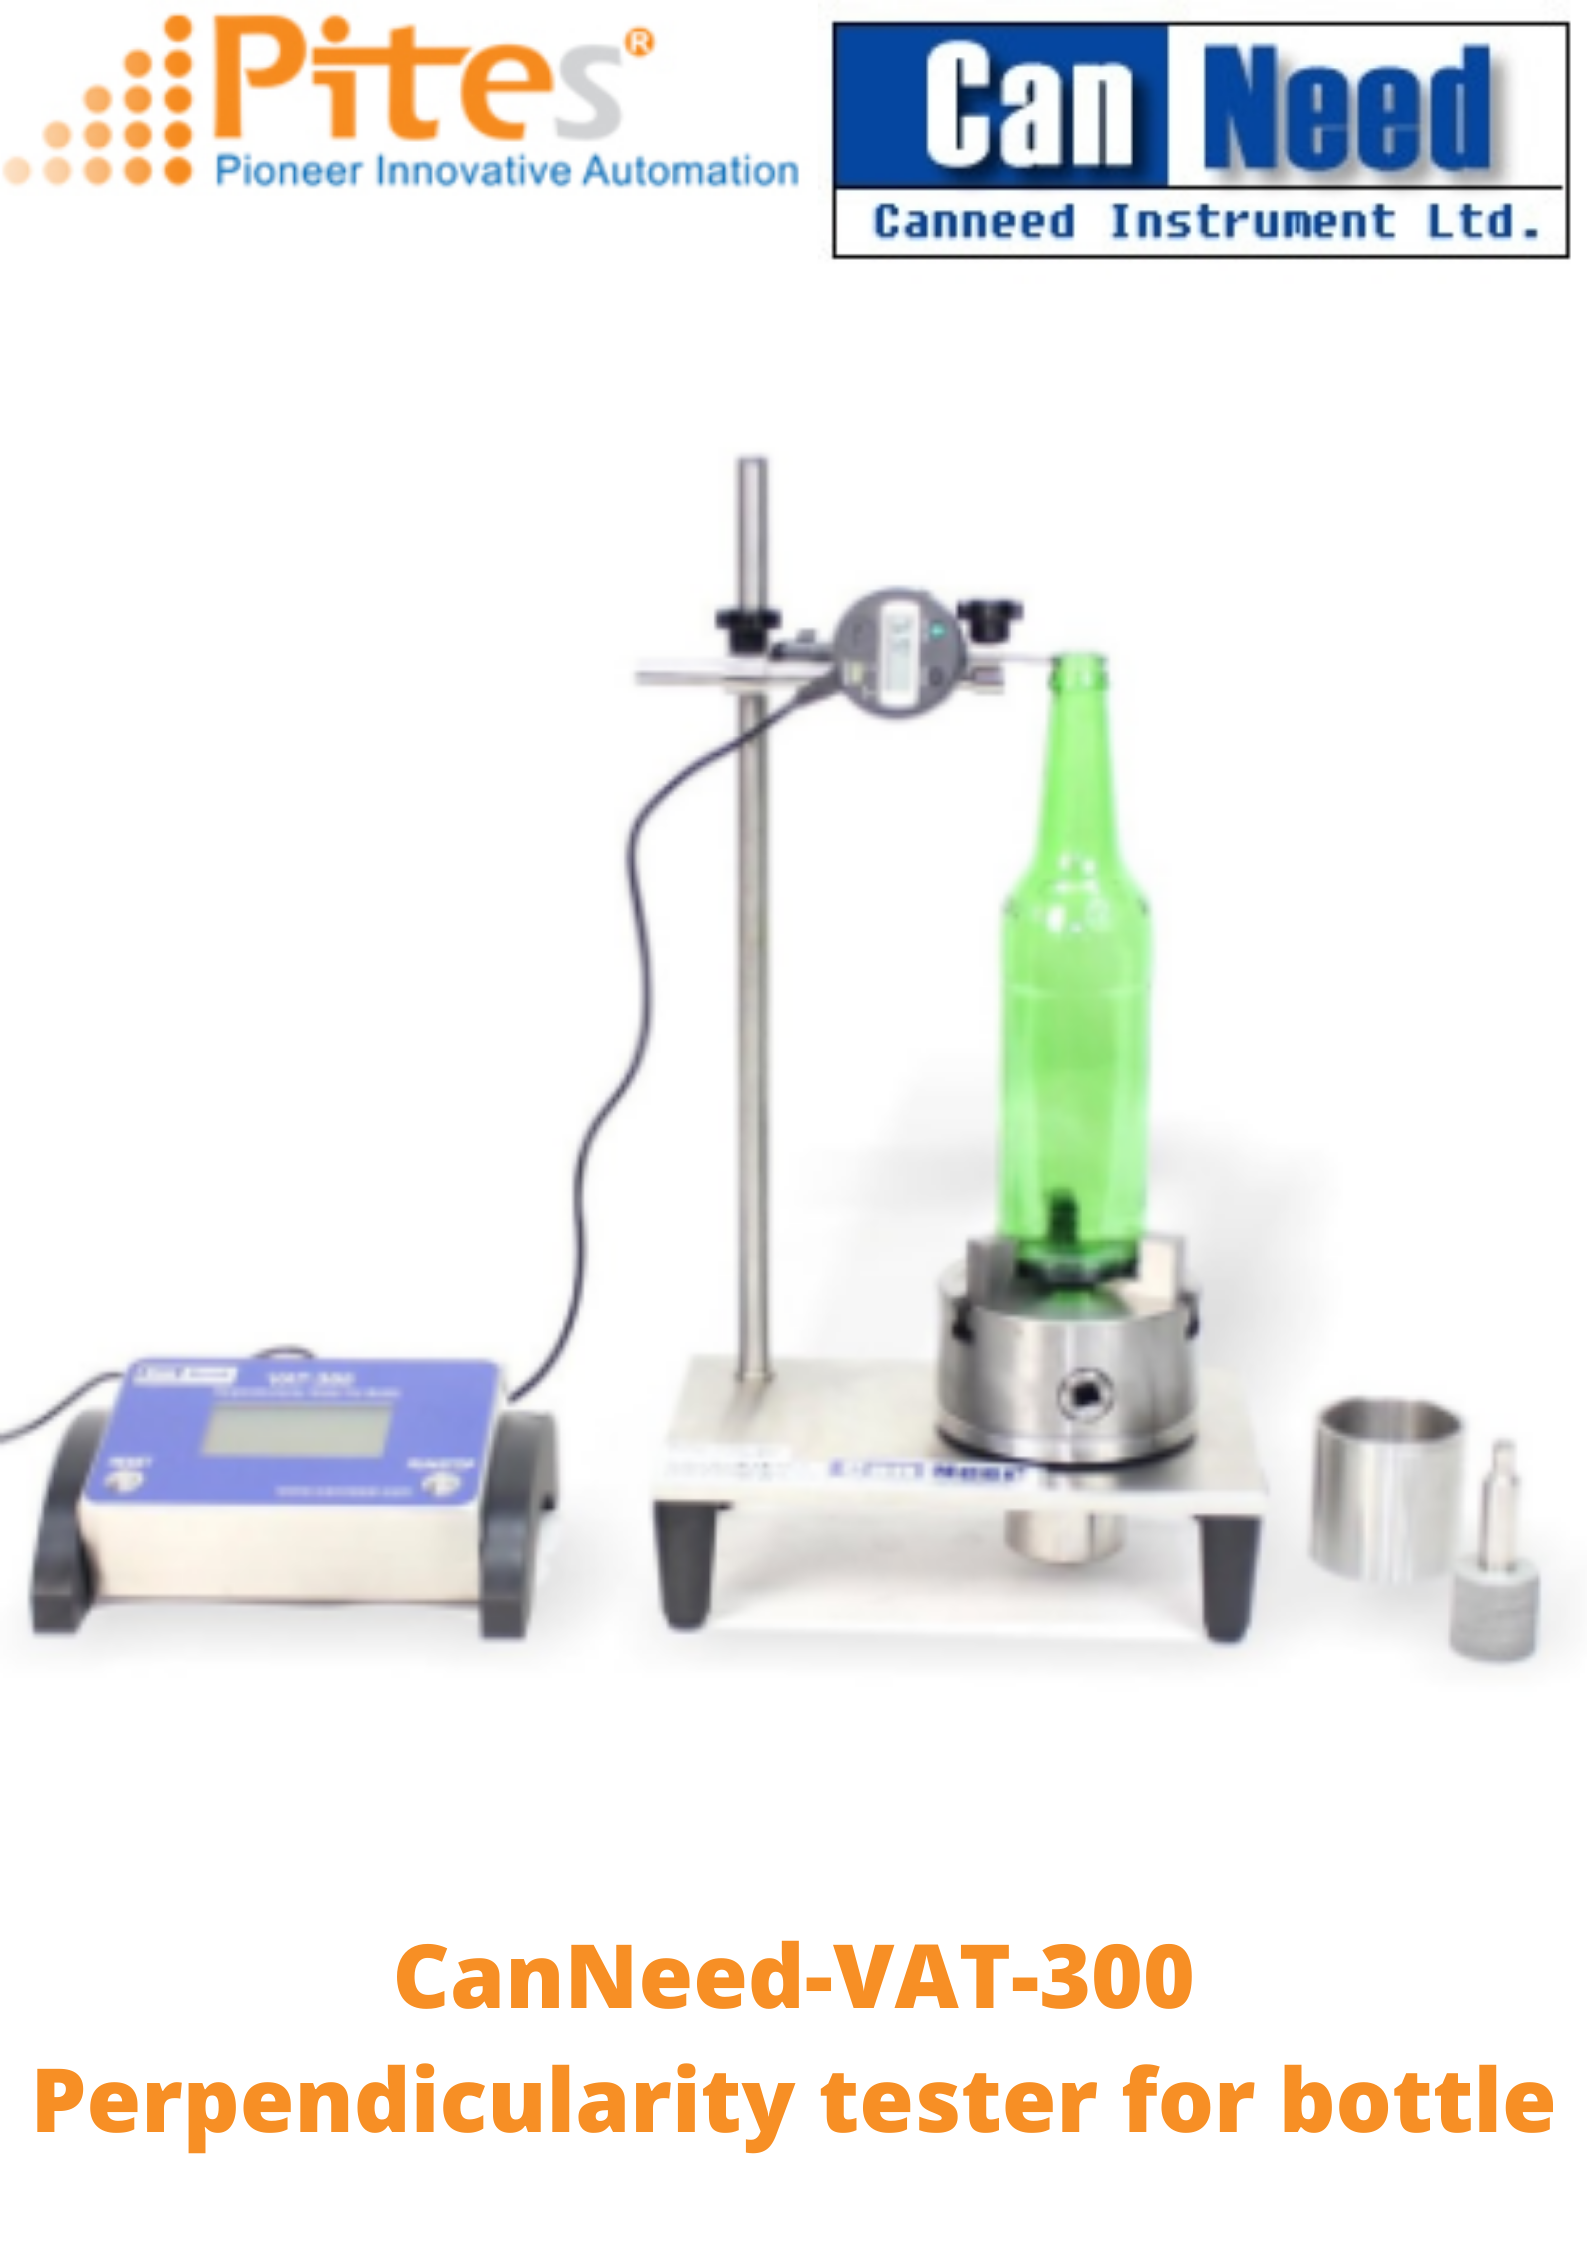 dai-ly-canneed-vietnam-canneed-viet-nam-canneed-vat-300-perpendicularity-tester-for-bottle.png